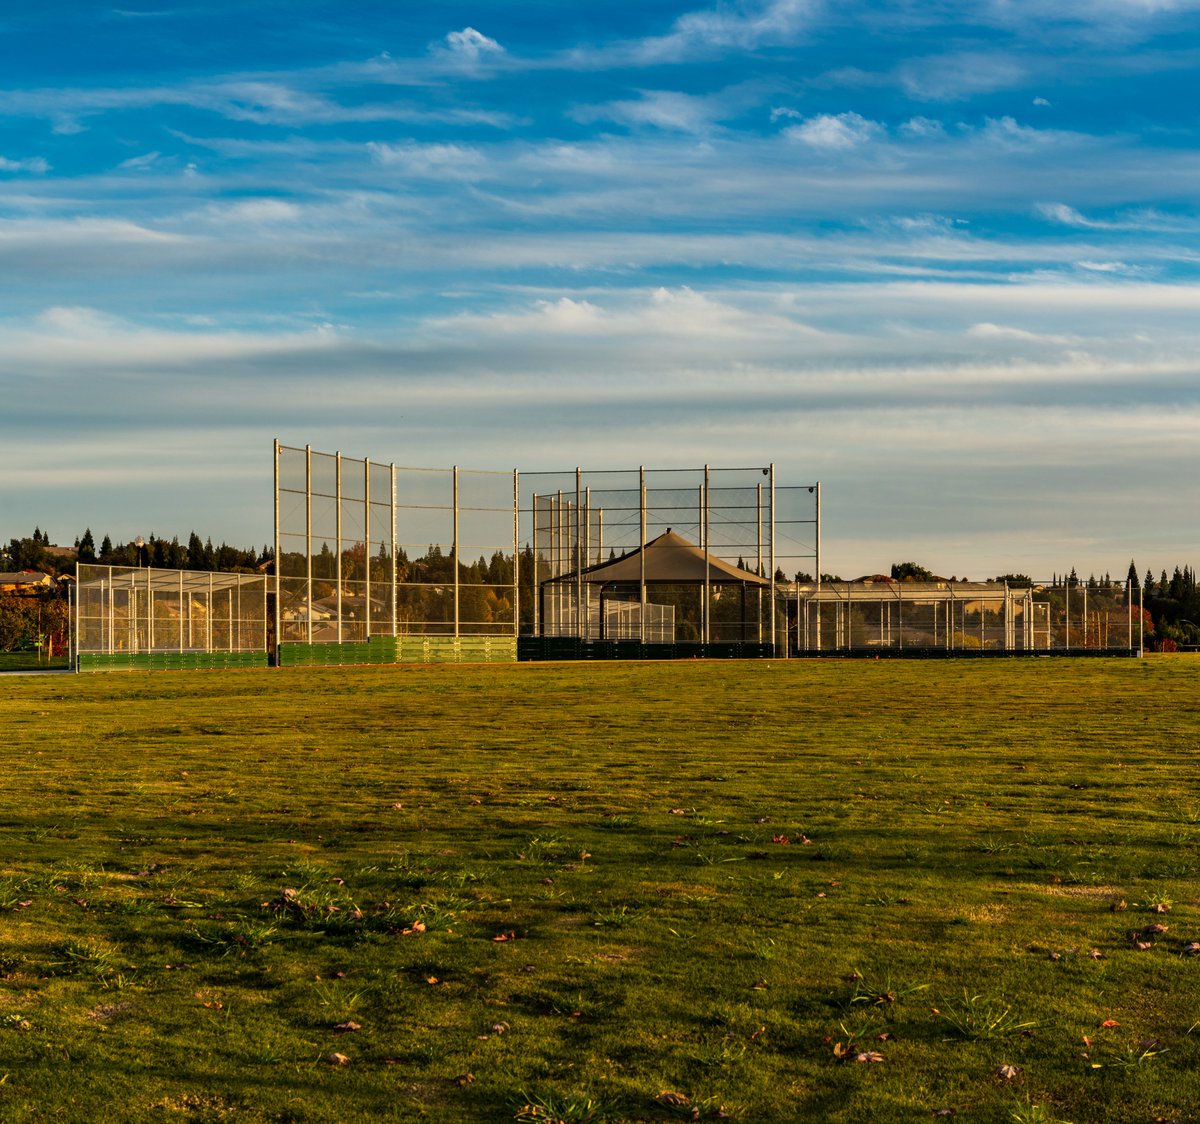 From tall backstops, to chain link perimeter fencing, tennis courts, and more – Crusader Fence provides the whole athletic package.

#sports #sportsfield #ballpark #ballparkfence #backstop #backstopconstruction #chainlink #fence #commericalfence #fencecontractor